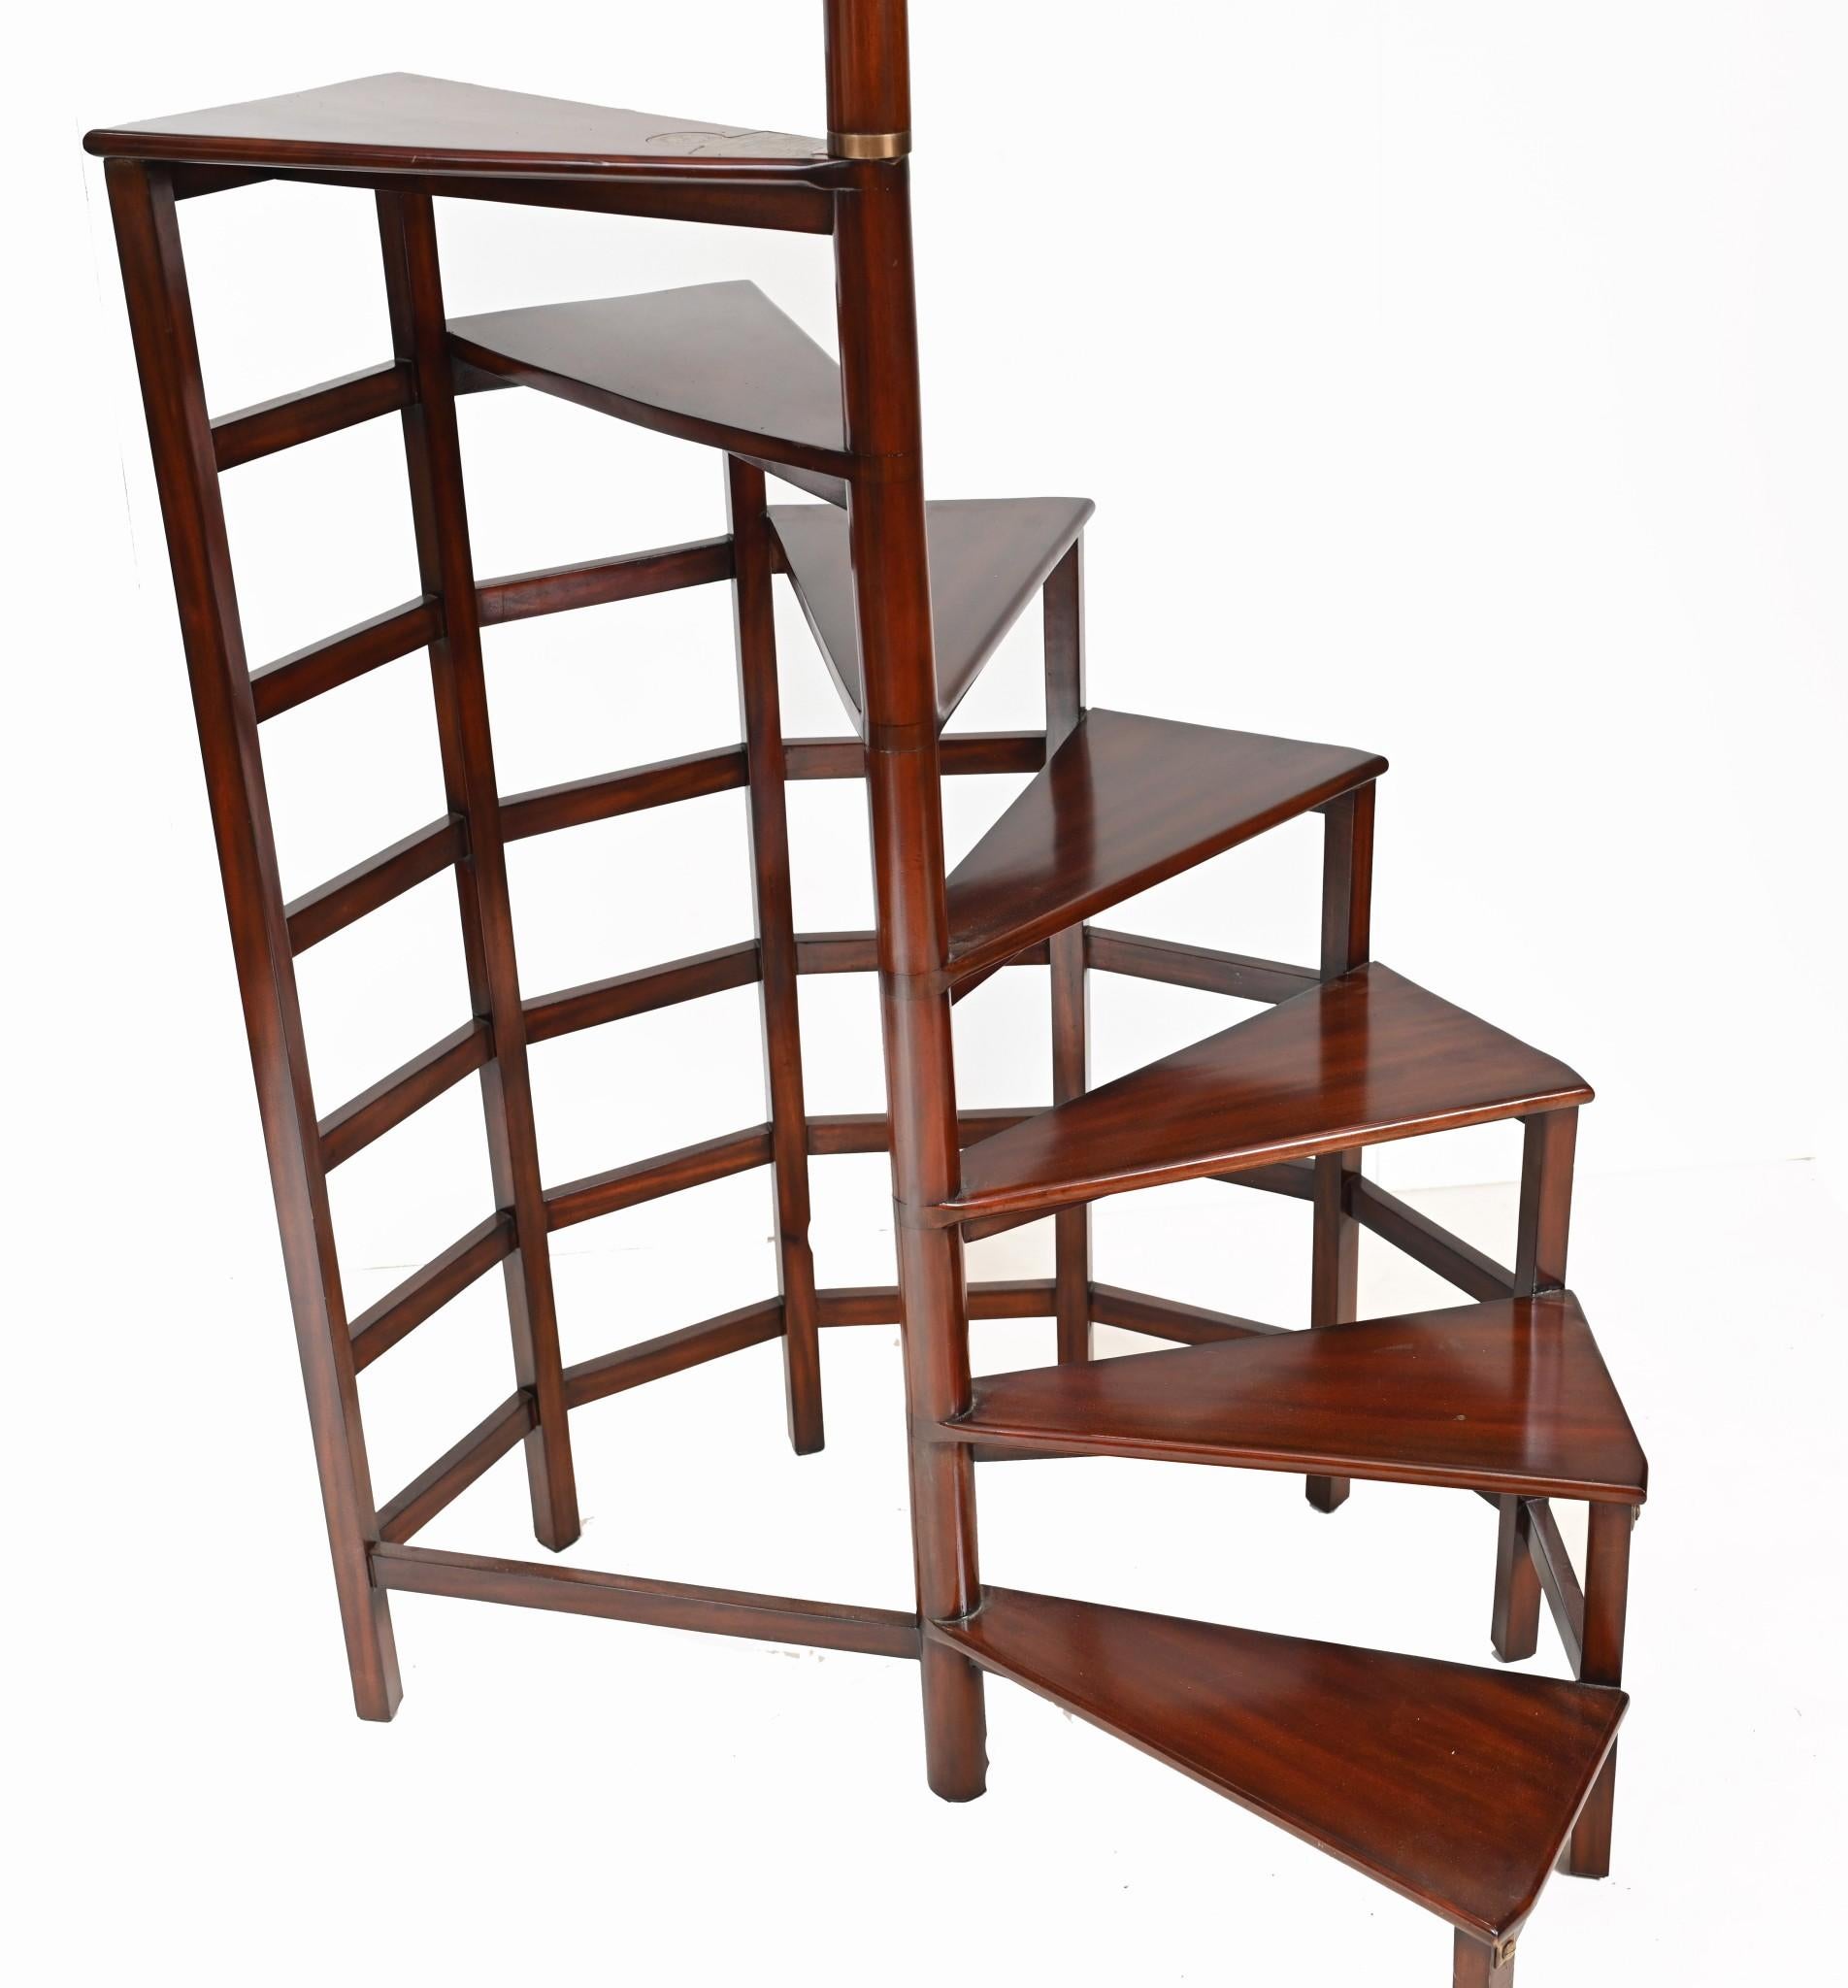 Elegant Regency style library ladder in mahogany
Great looking interiors piece what scrolls around with seven steps
Perfect for the large bookcase or library study
Some of our items are in storage so please check ahead of a viewing to see if it is